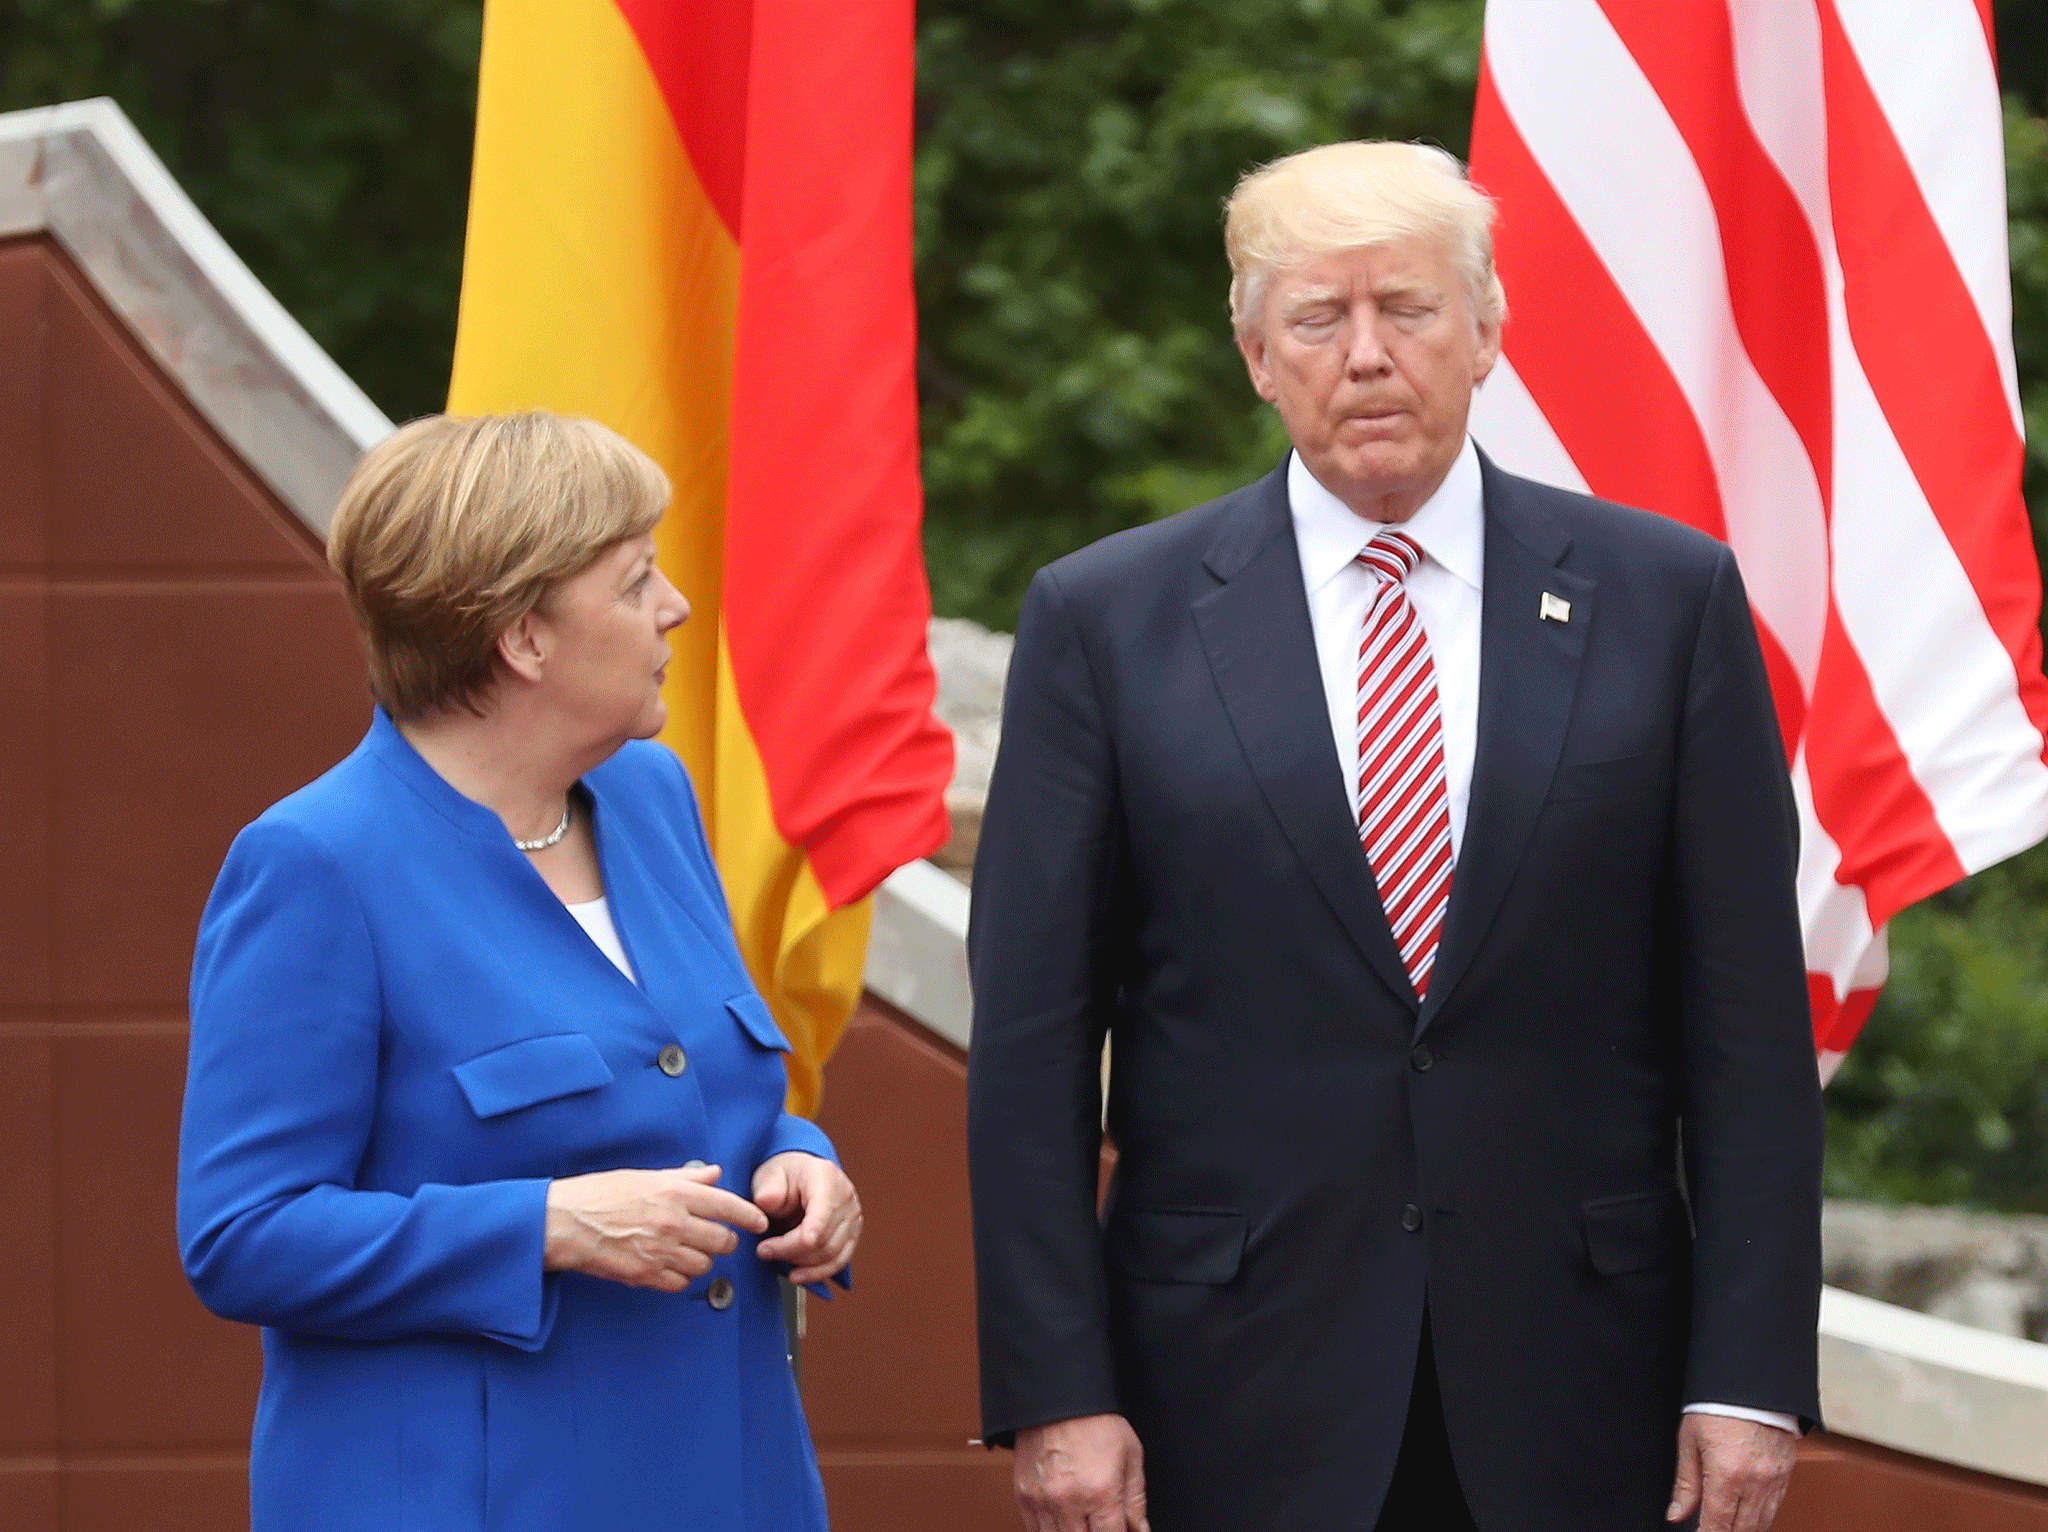 German Chancellor Angela Merkel and US President Donald Trump at the G7 Taormina summit on the island of Sicily on 26 May, 2017